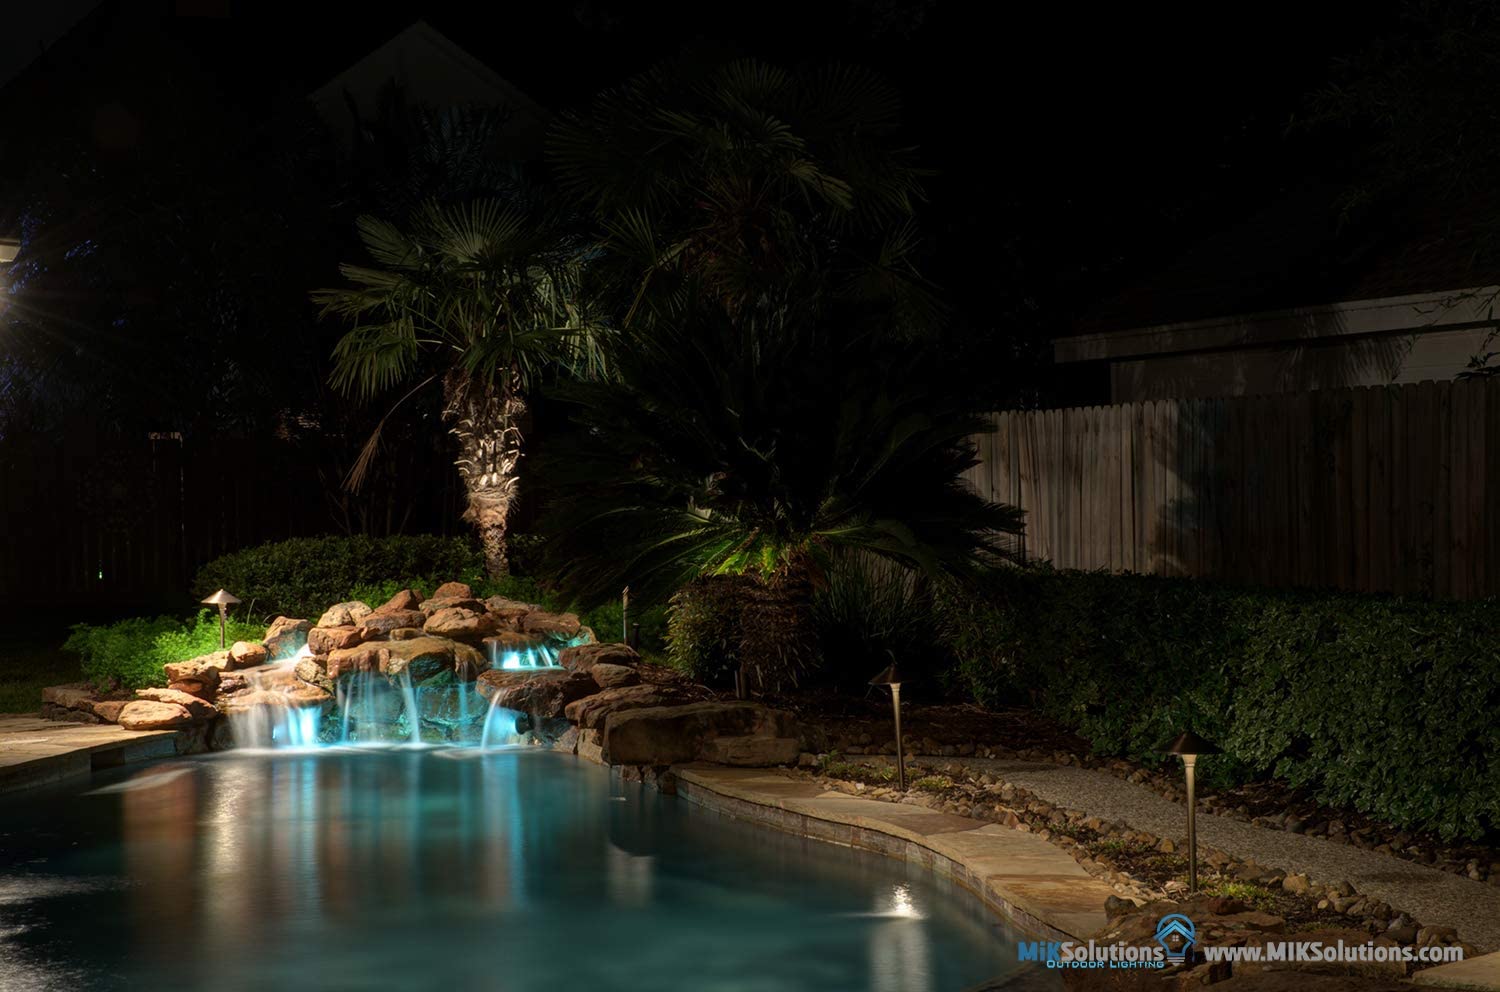 LED lighting solutions for Swimming pools